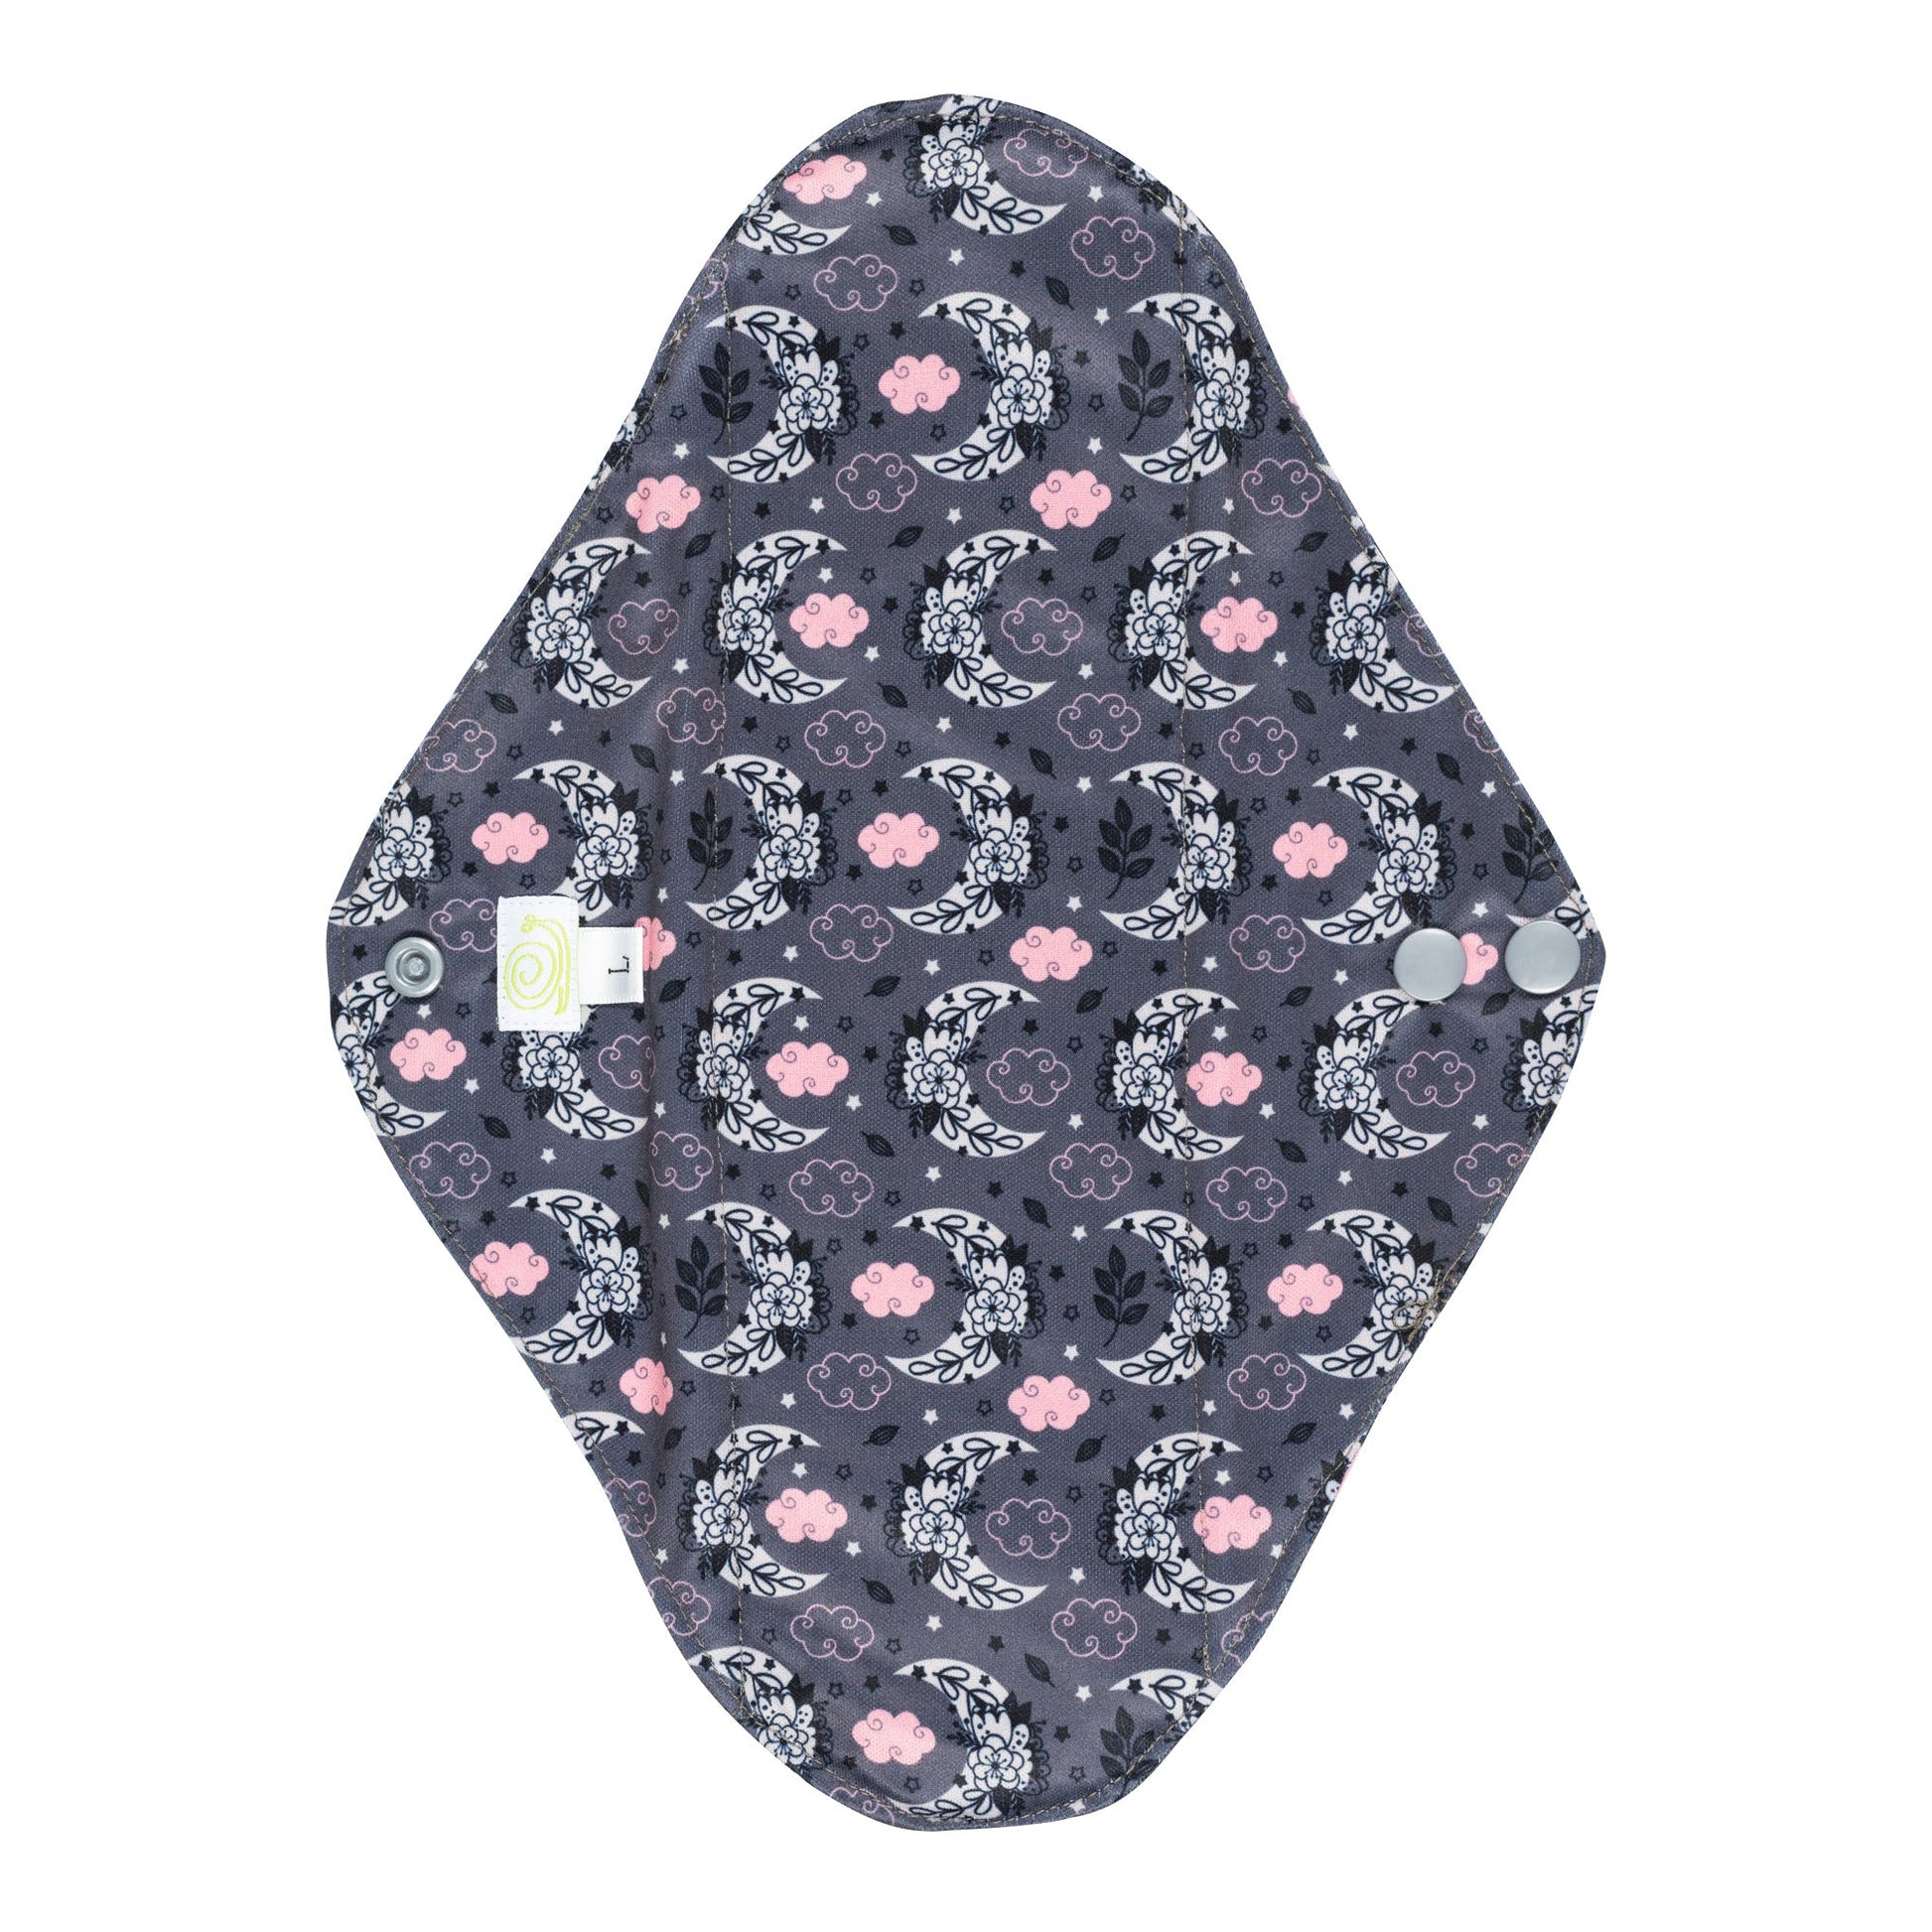 Reusable Sanitary Pad with a black background and a white and pink moon and cloud design on it. 